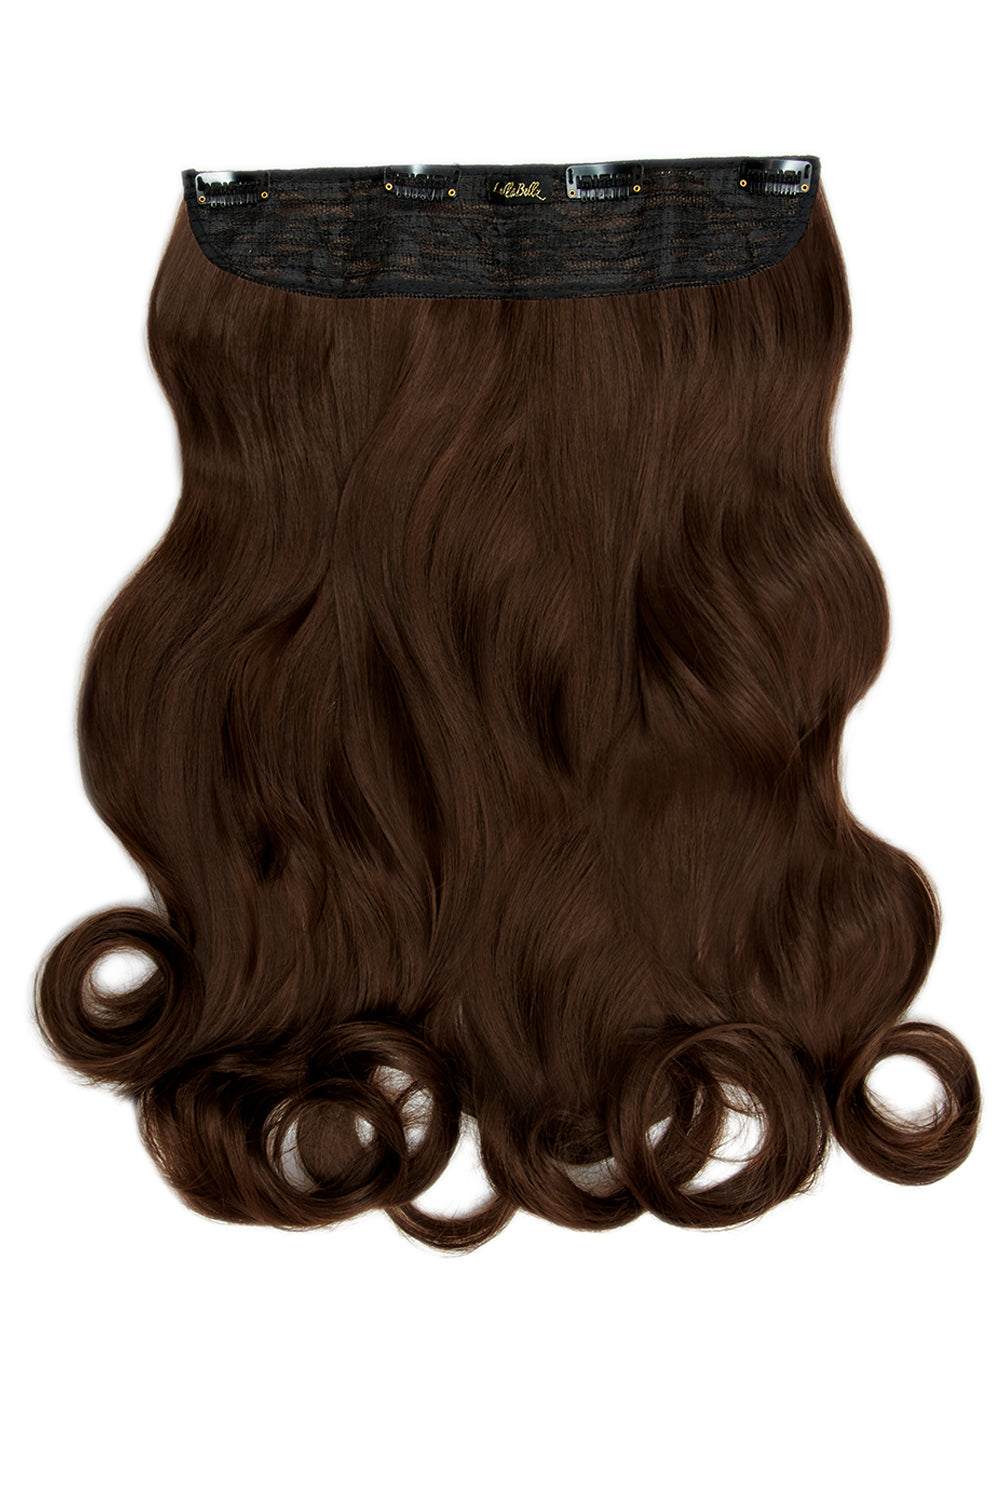 Thick 20" 1 Piece Curly Clip In Hair Extensions - LullaBellz - Golden Brown